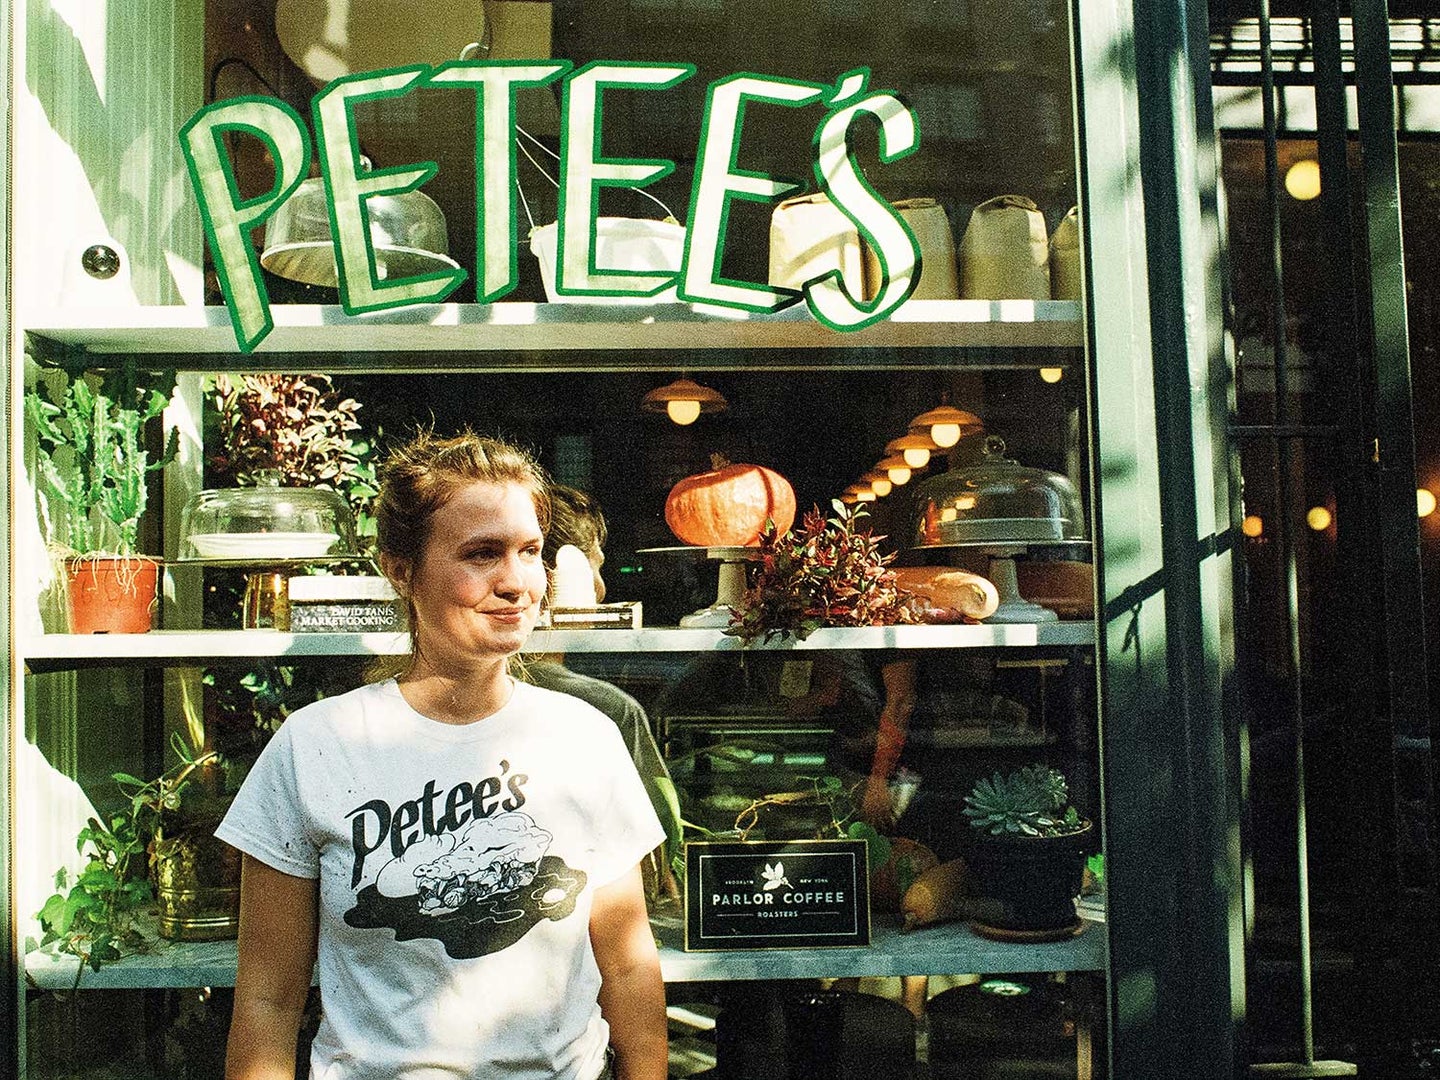 Petra “Petee” Paredez is the head baker and co-owner of Manhattan’s famed Petee’s Pie Company.